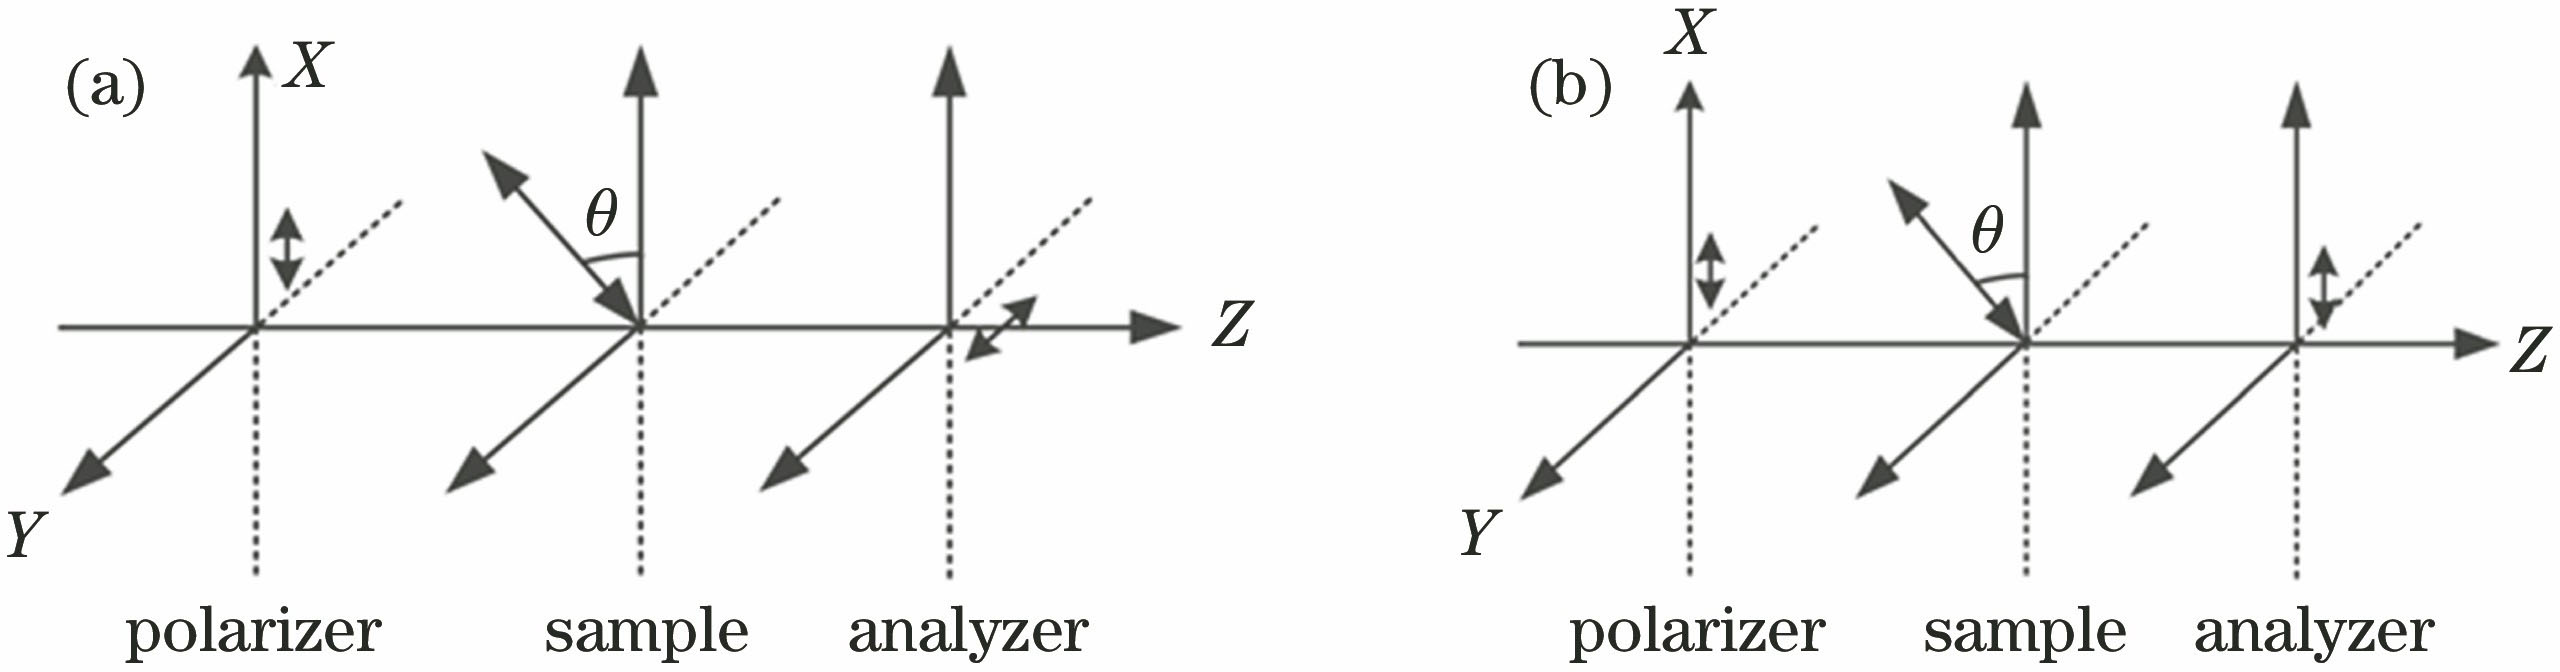 Configuration of electric vector for test system. (a) Orthogonal polarization; (b) parallel polarization